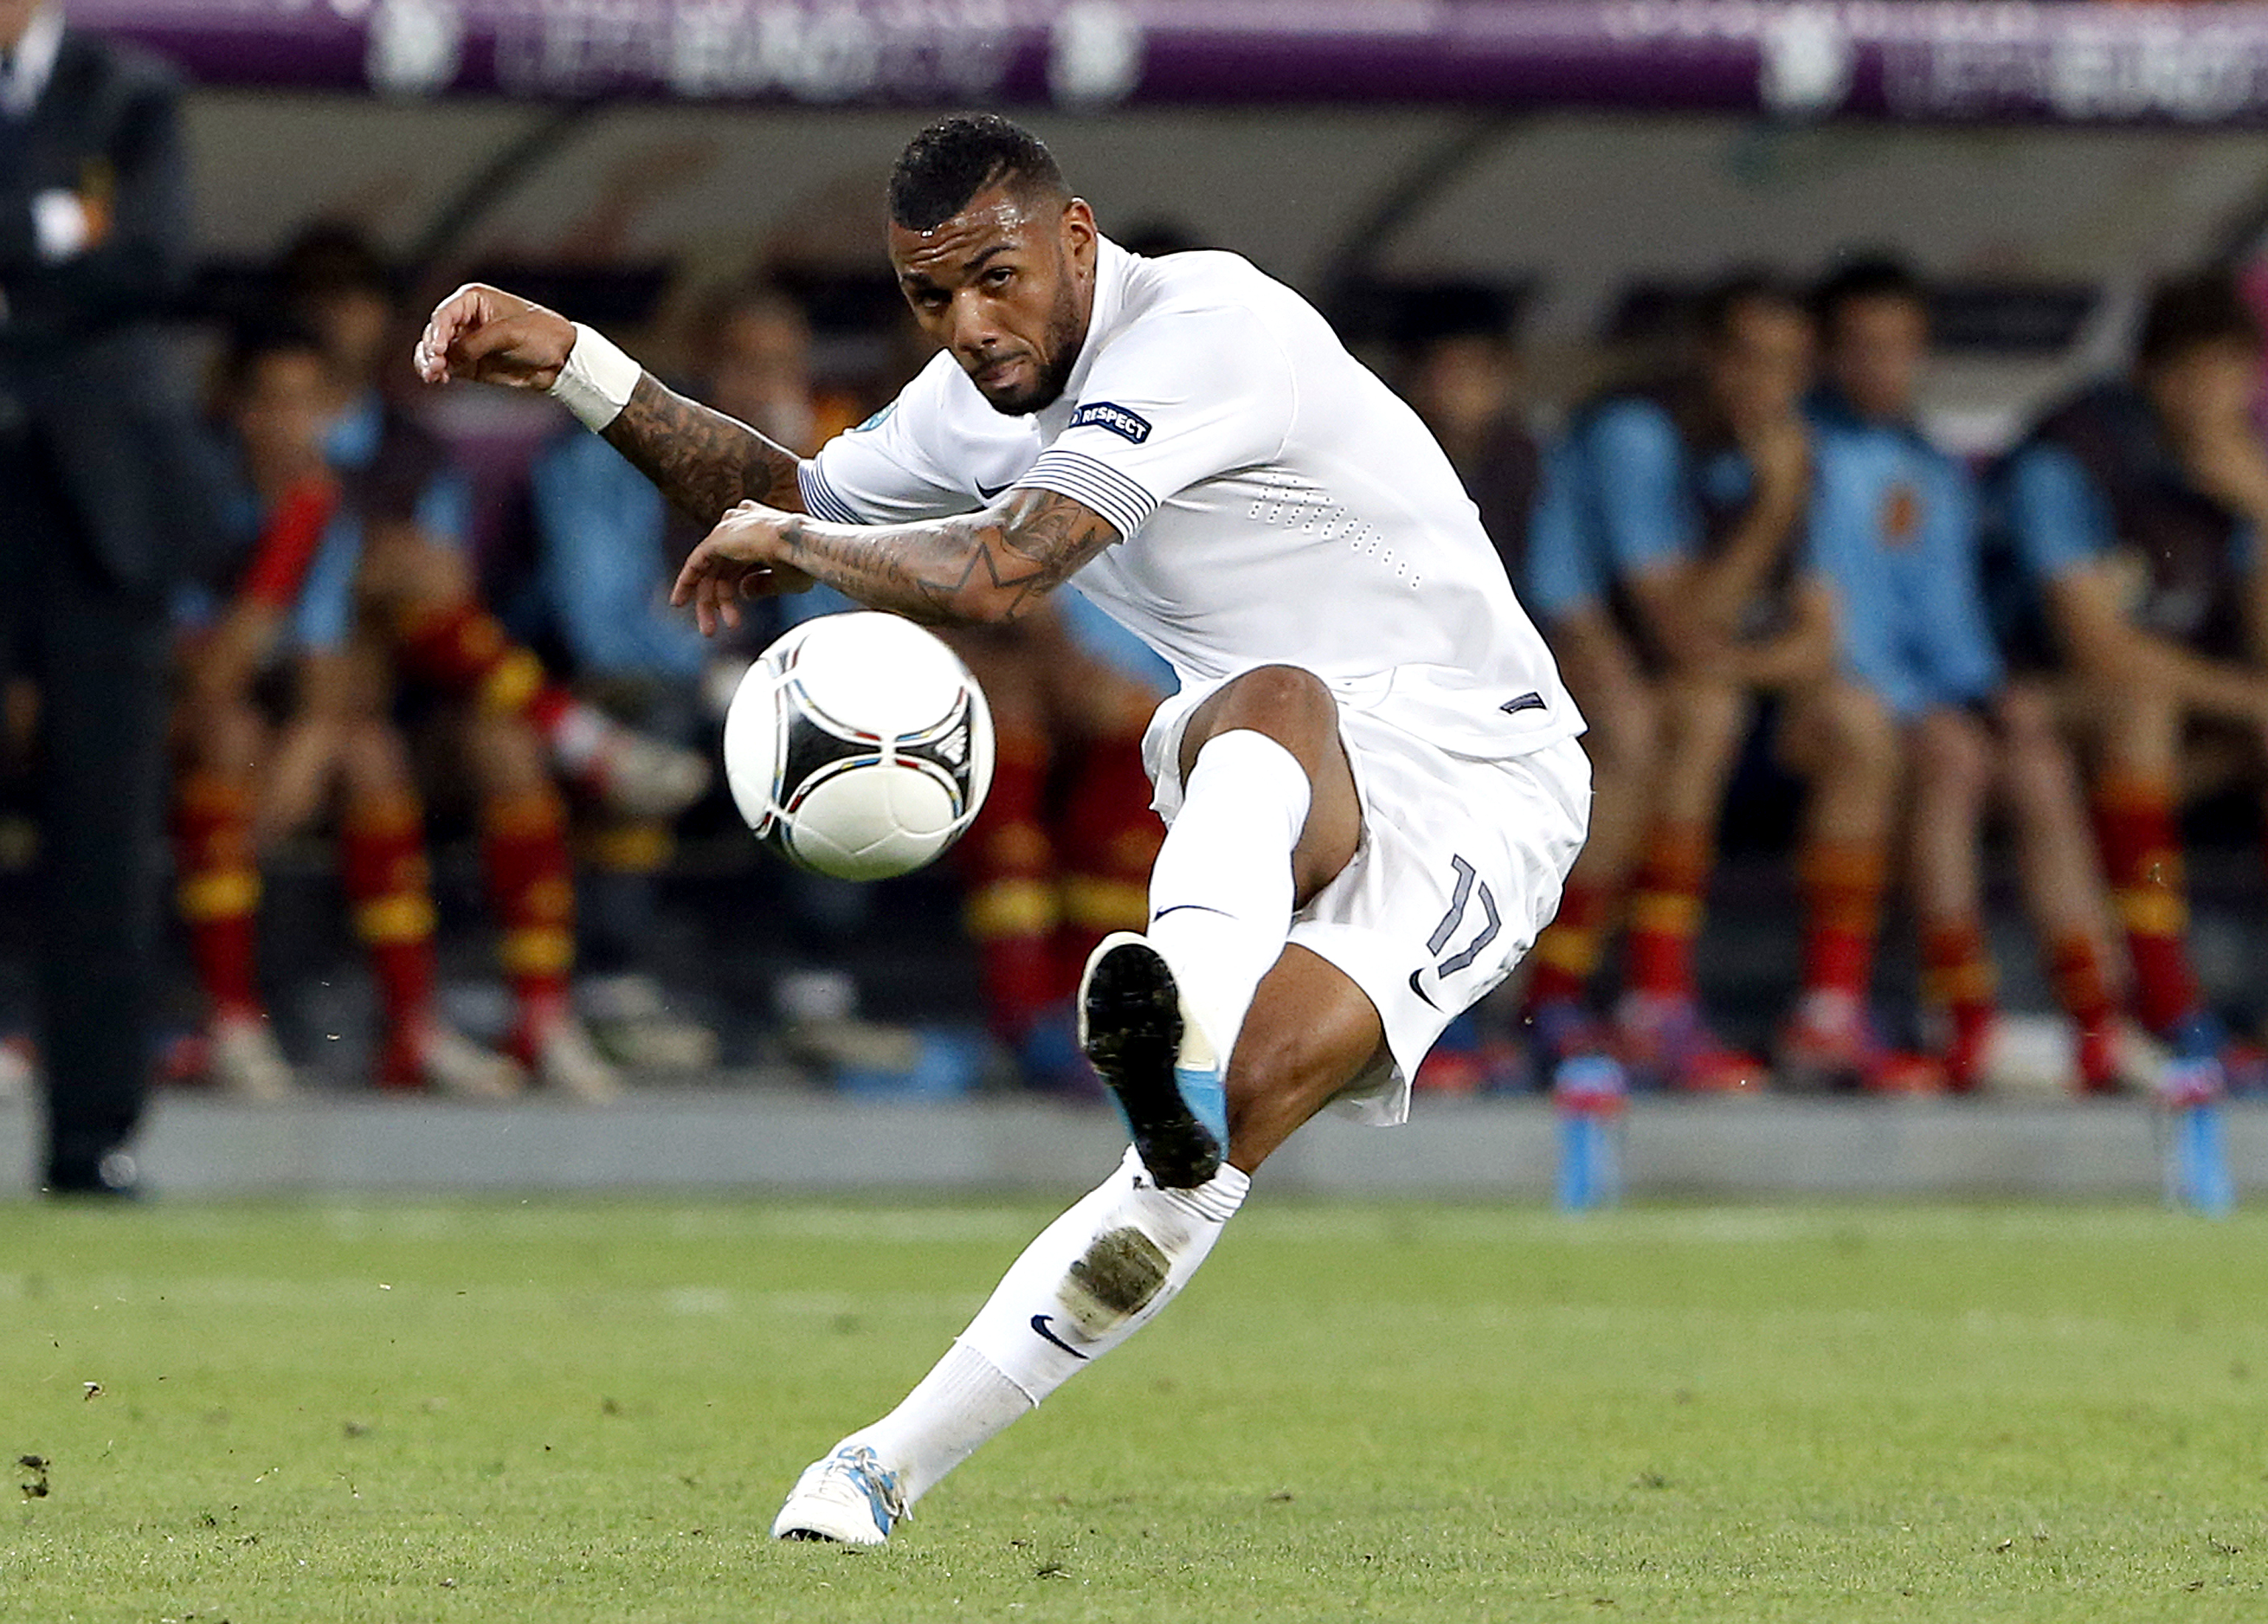 epa03278760 Yann M'Vila of France in action during the quarter final match of the UEFA EURO 2012 between Spain and France in Donetsk, Ukraine, 23 June 2012.  EPA/KERIM OKTEN UEFA Terms and Conditions apply http://www.epa.eu/downloads/UEFA-EURO2012-TCS.pdf